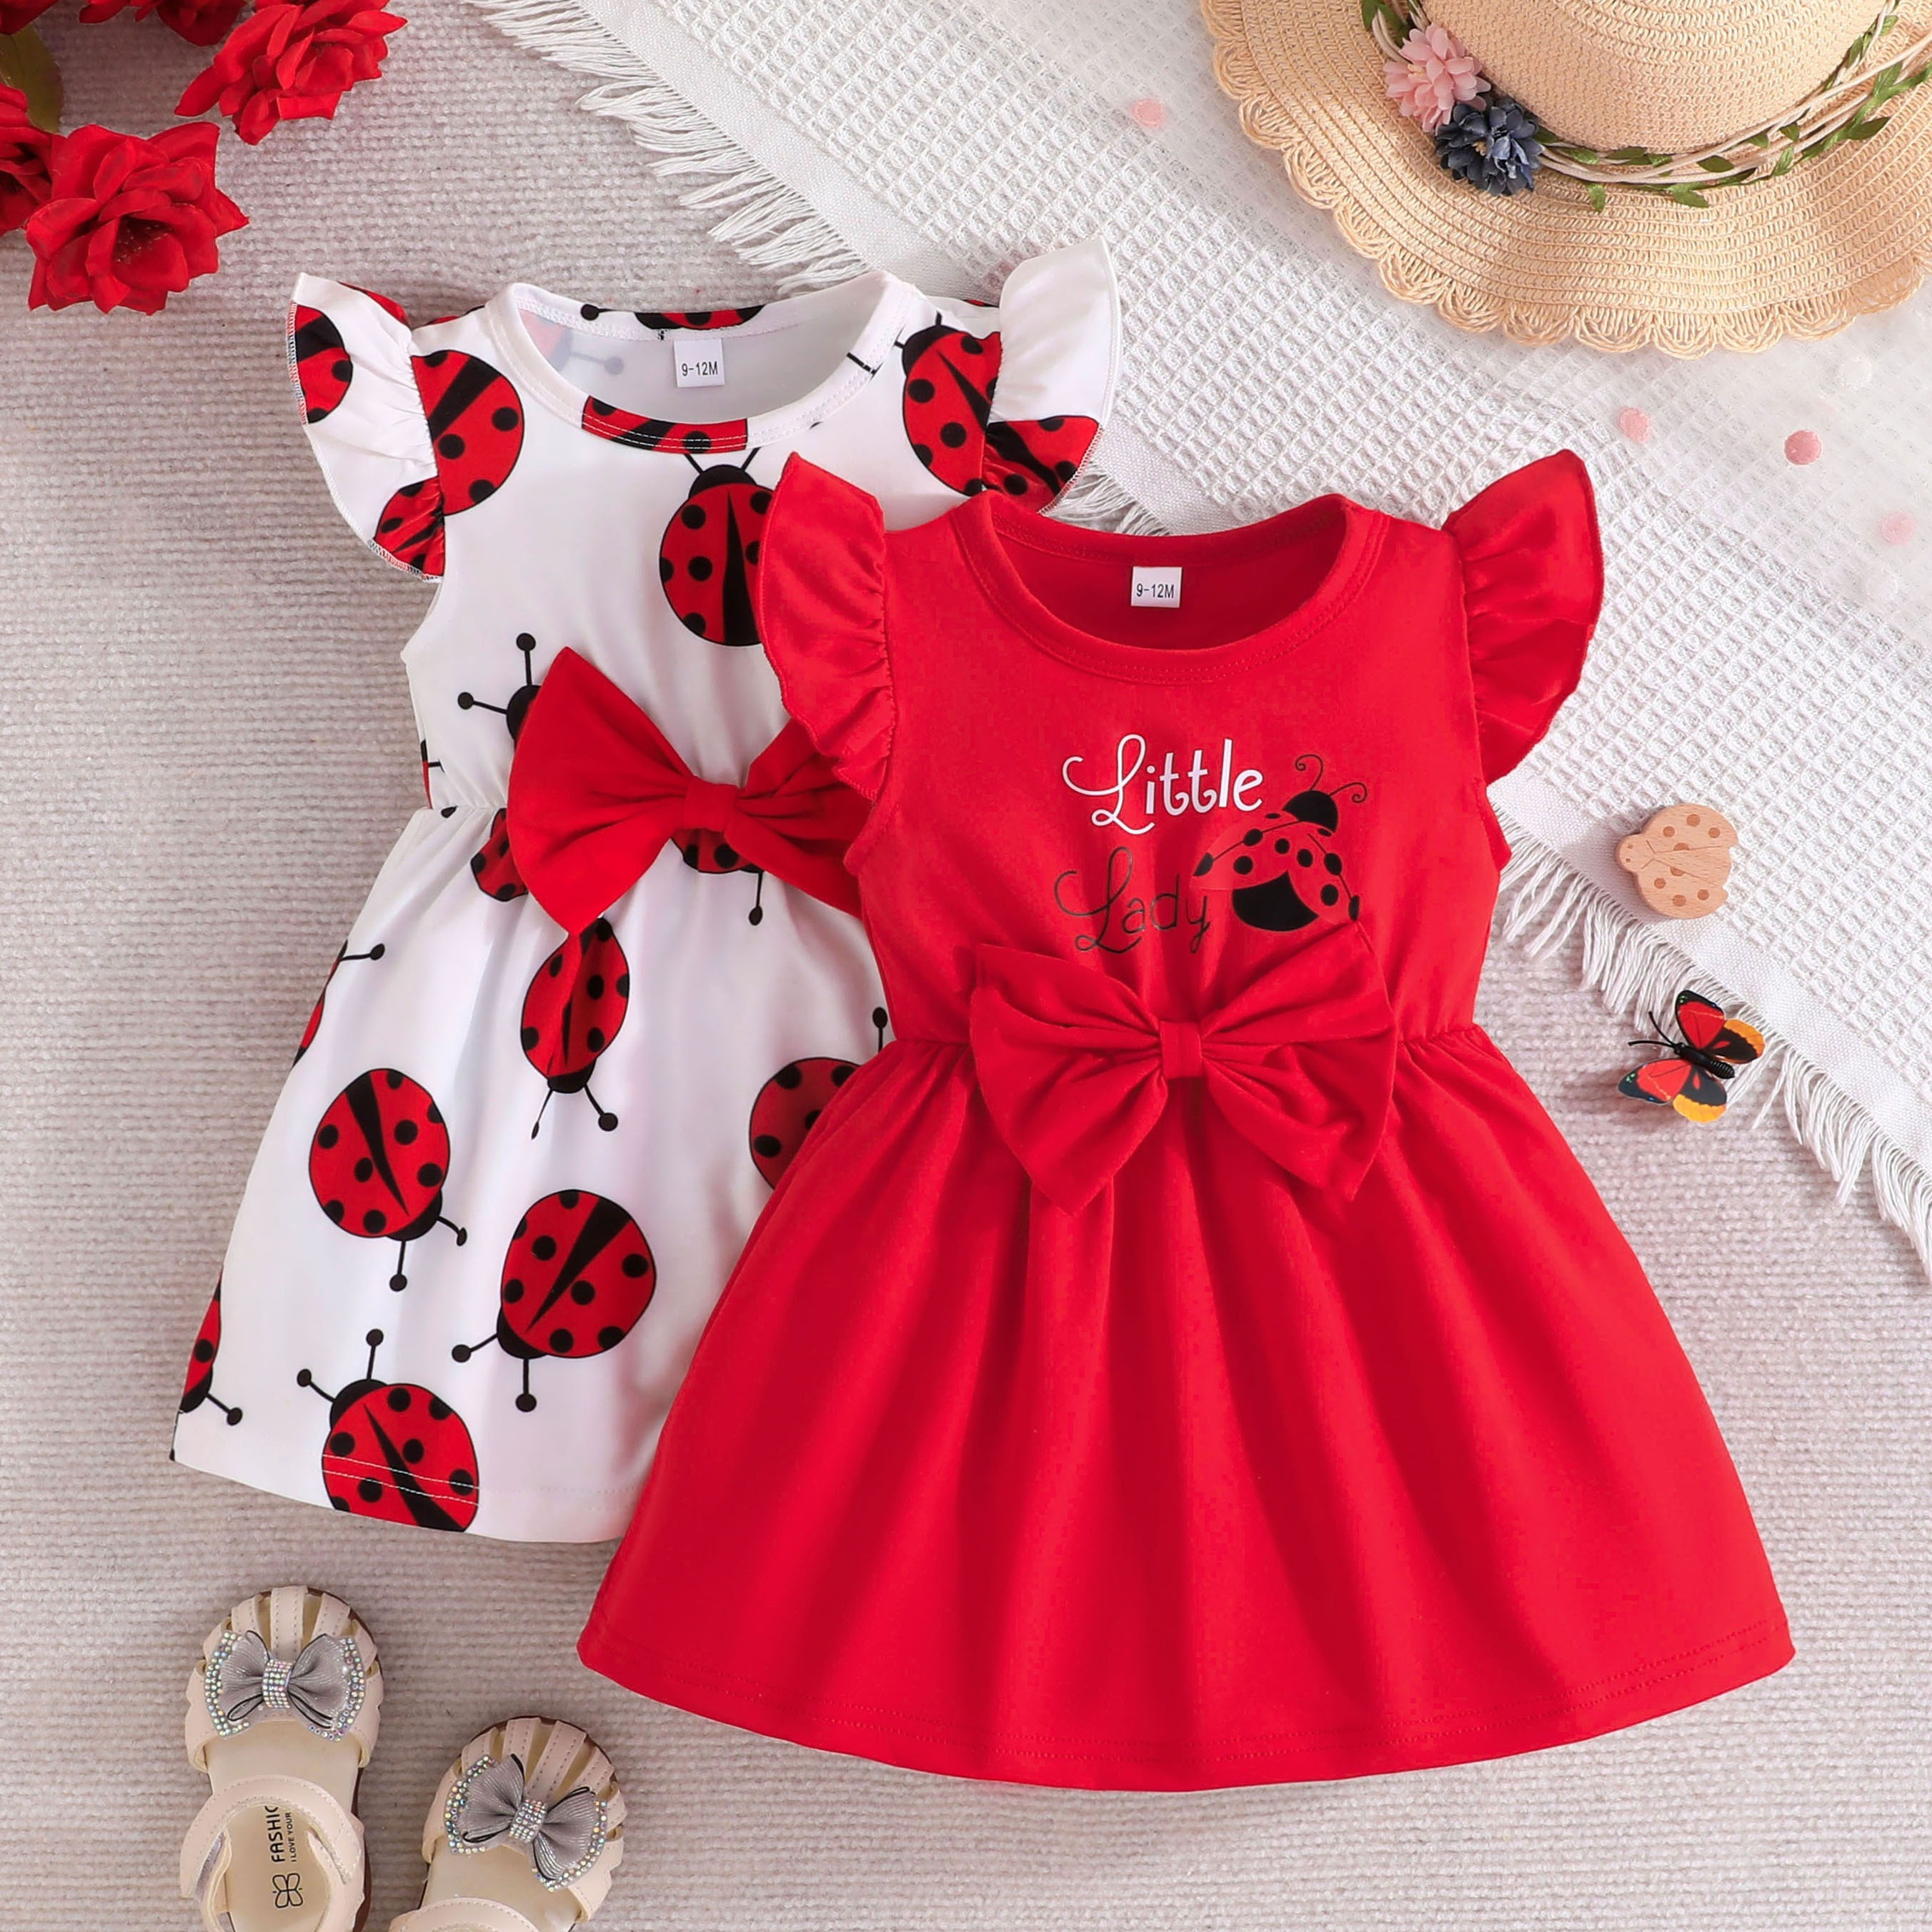 

2pcs Baby's Cartoon Ladybug Pattern Dress, Casual Cap Sleeve Dress, Infant & Toddler Girl's Clothing For Summer/spring, As Gift